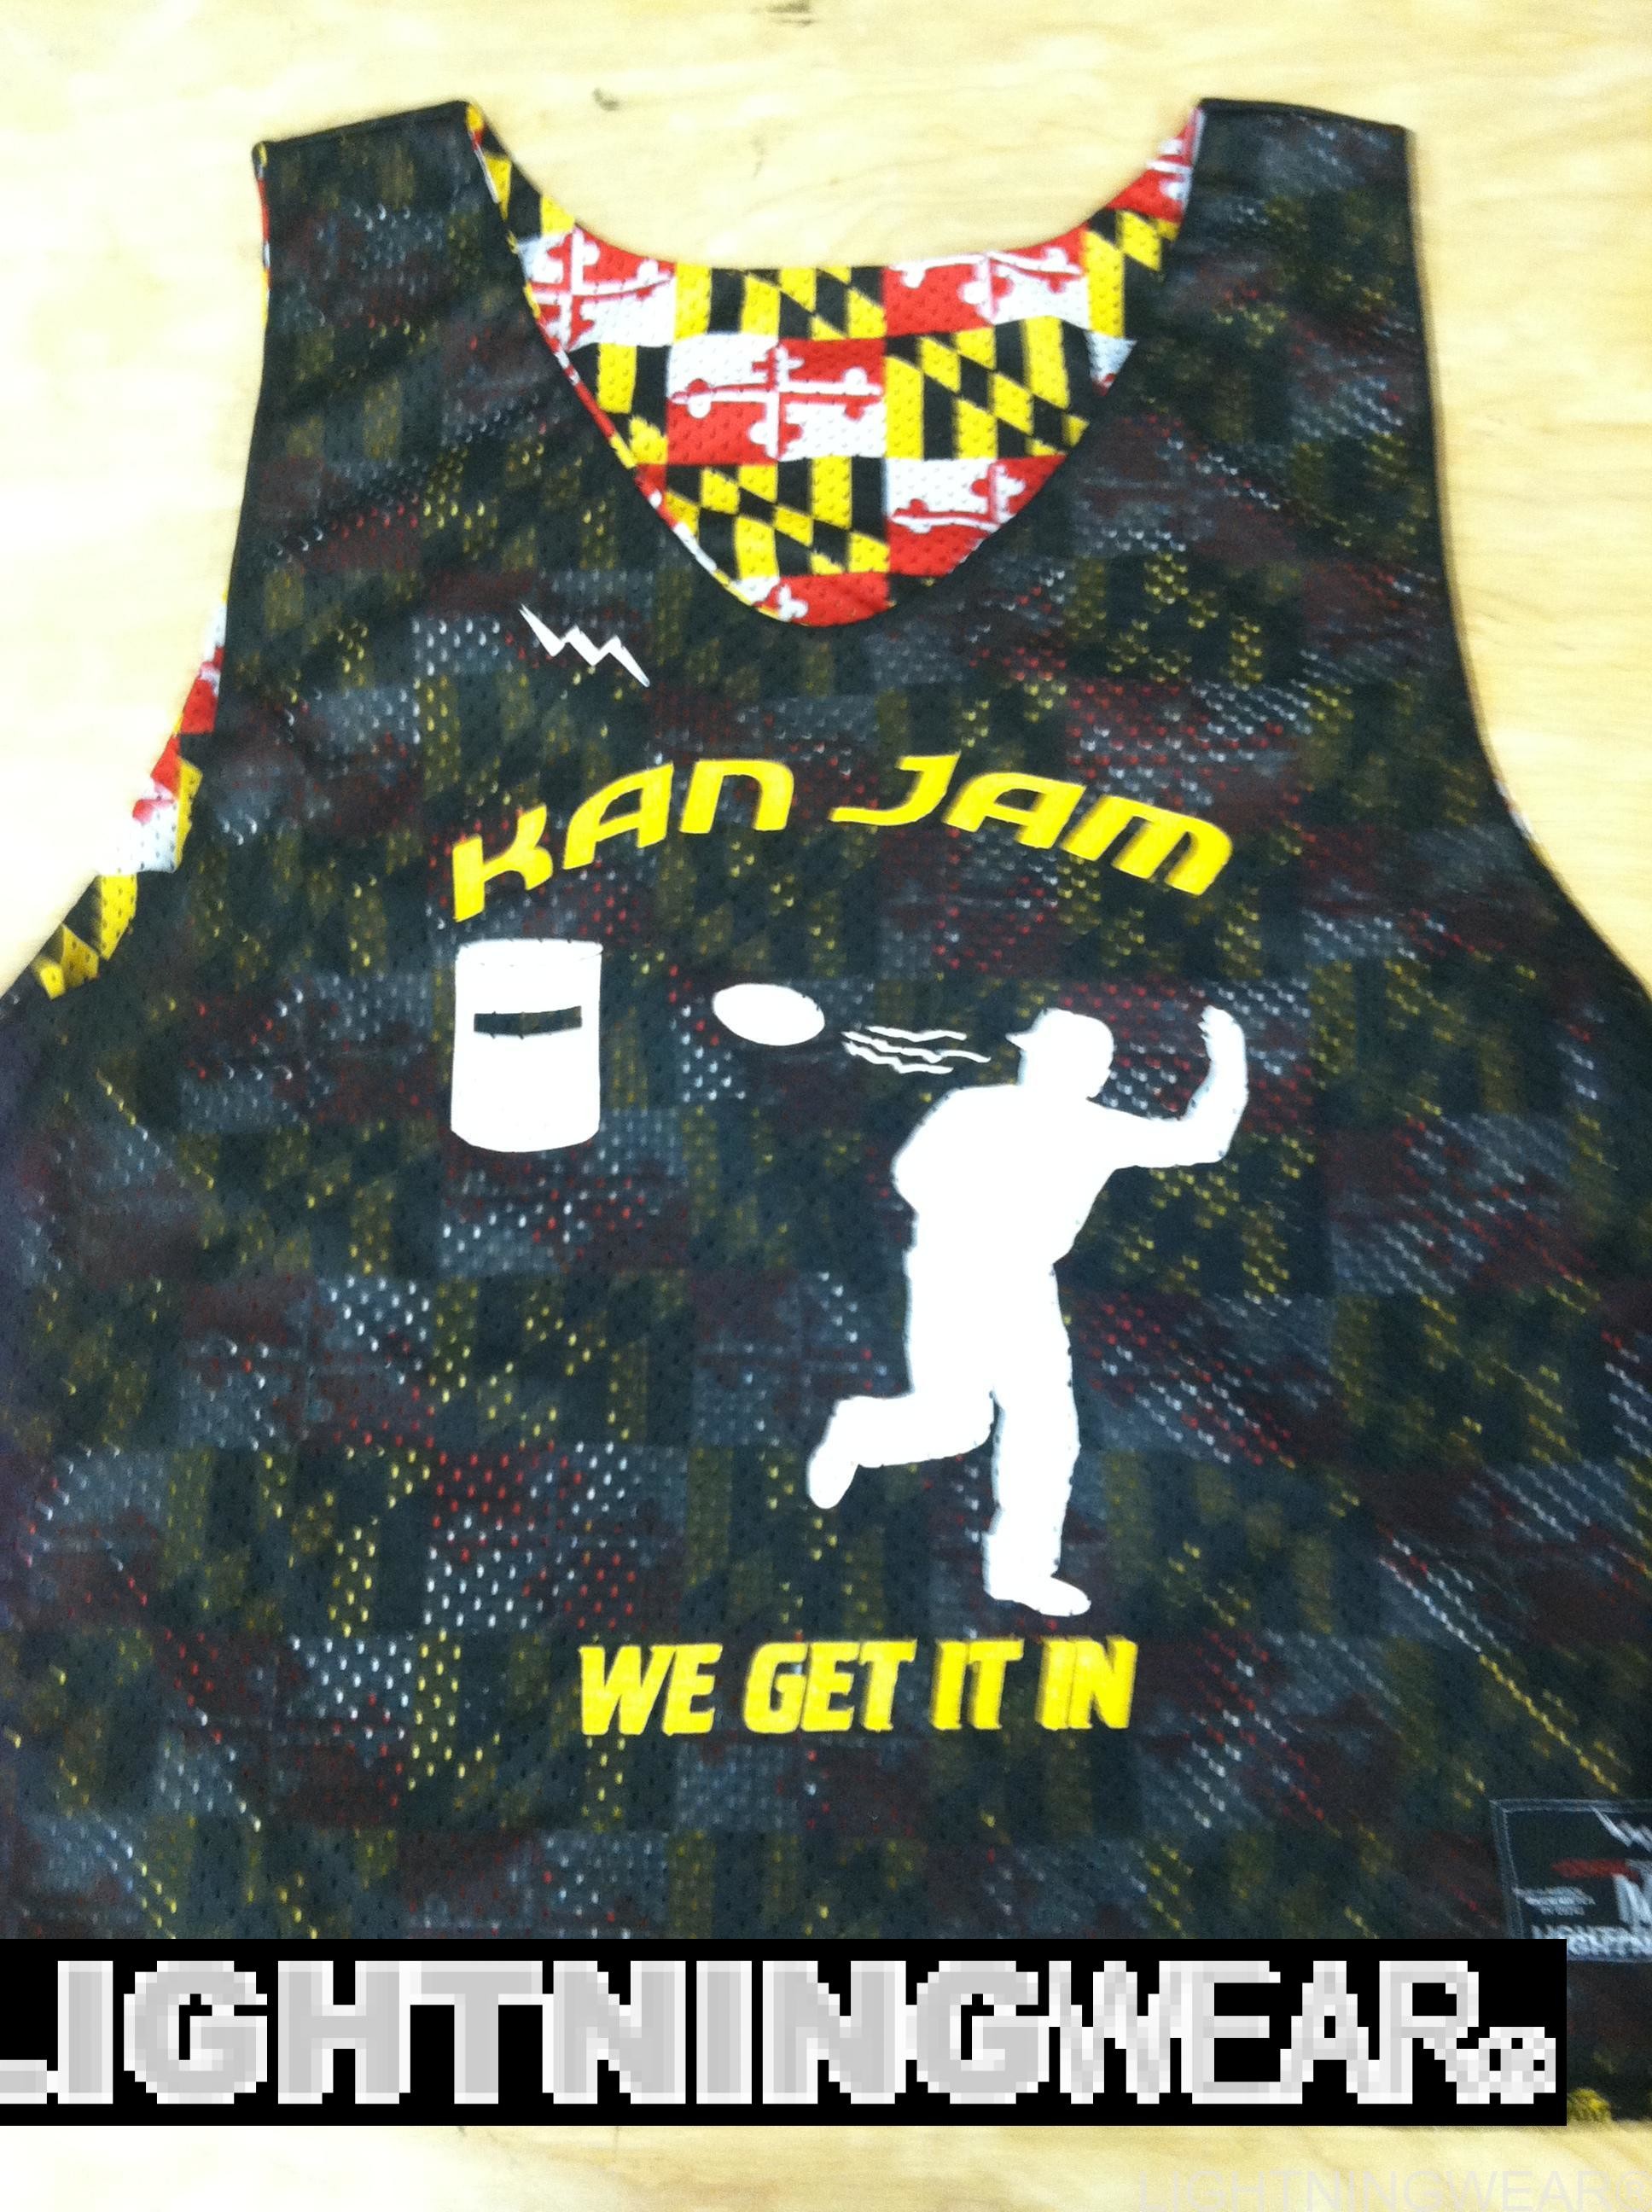 1936x2592 In maryland flag pinnies maryland lax pinnies reversible maryland flag .